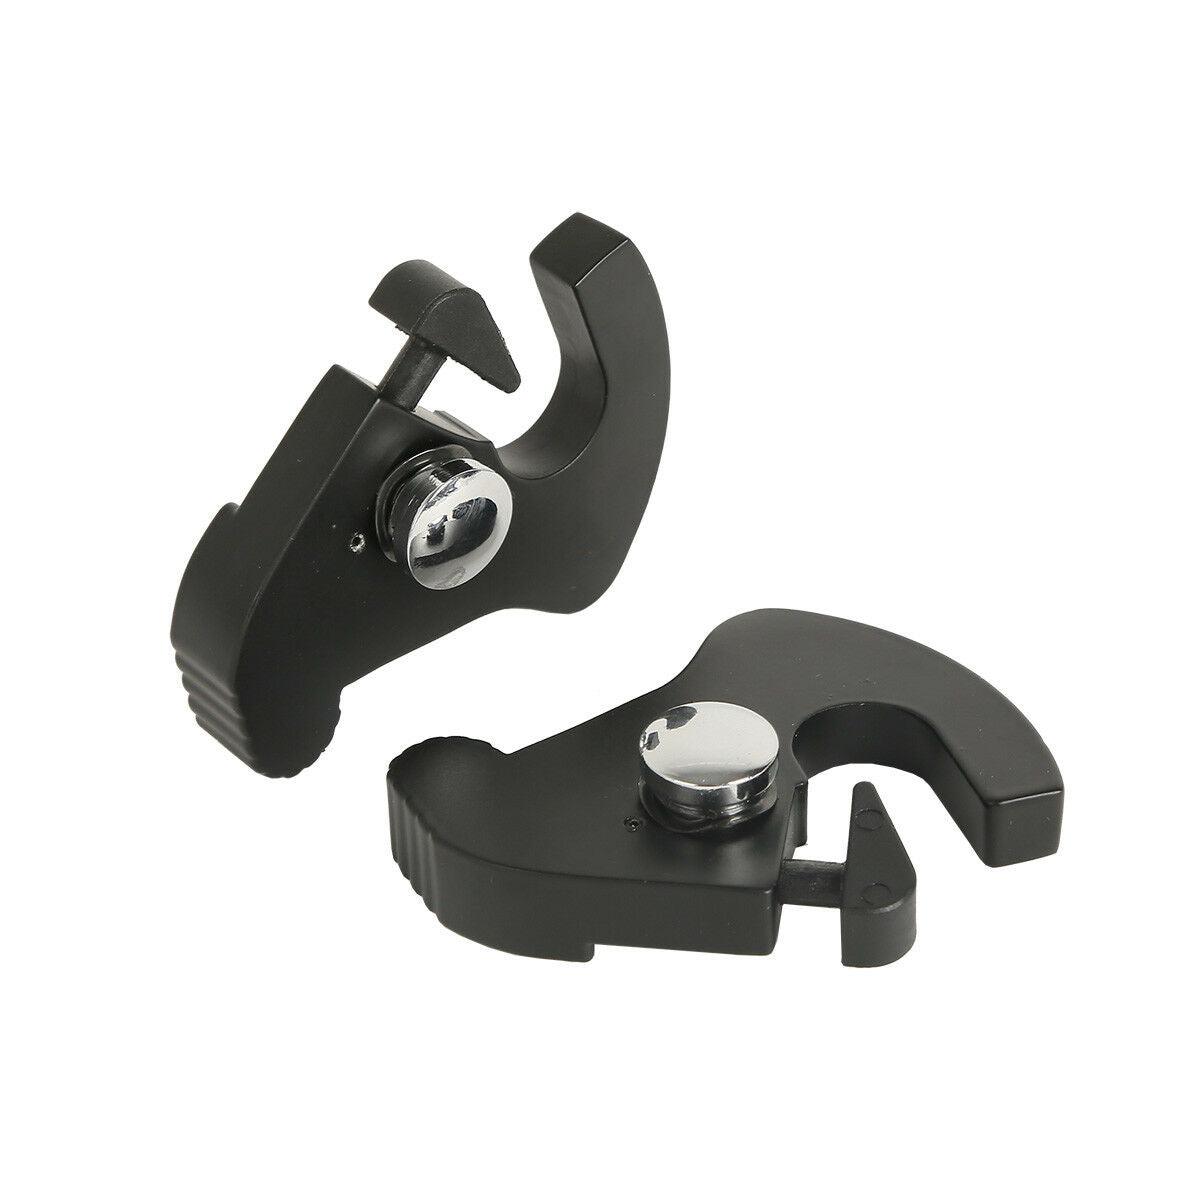 Black Sissy Bar Luggage Rack Docking Latch Clip Kits For Harley Touring Softail - Moto Life Products